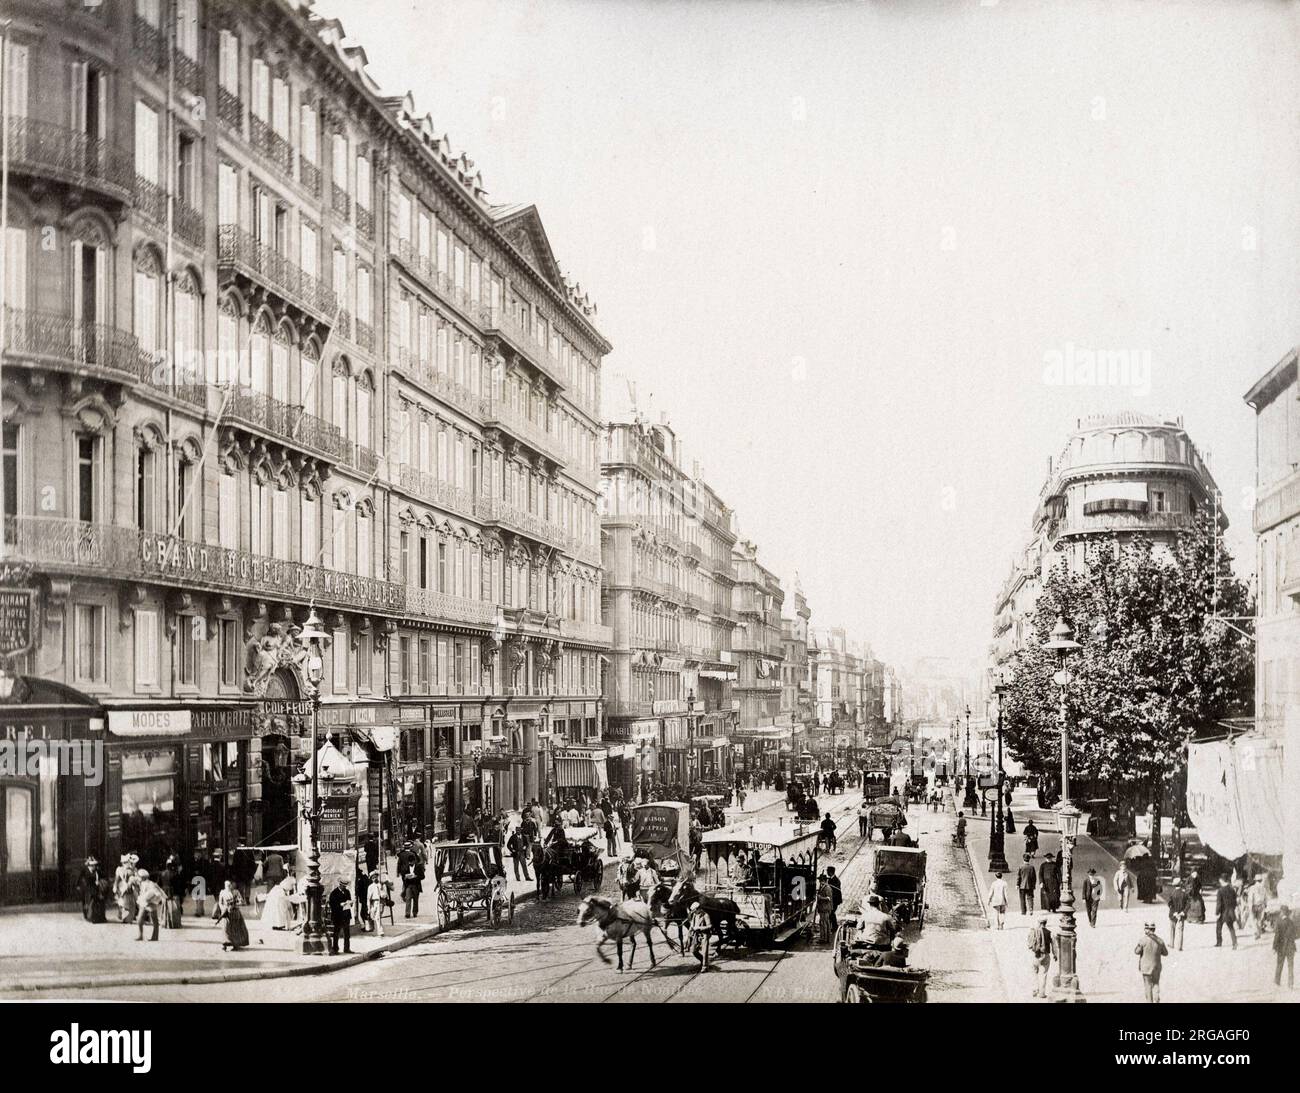 Vintage 19th century photograph - rue de Noailles, Marseilles, Marseille, France, busy with horse drawn traffic. Stock Photo